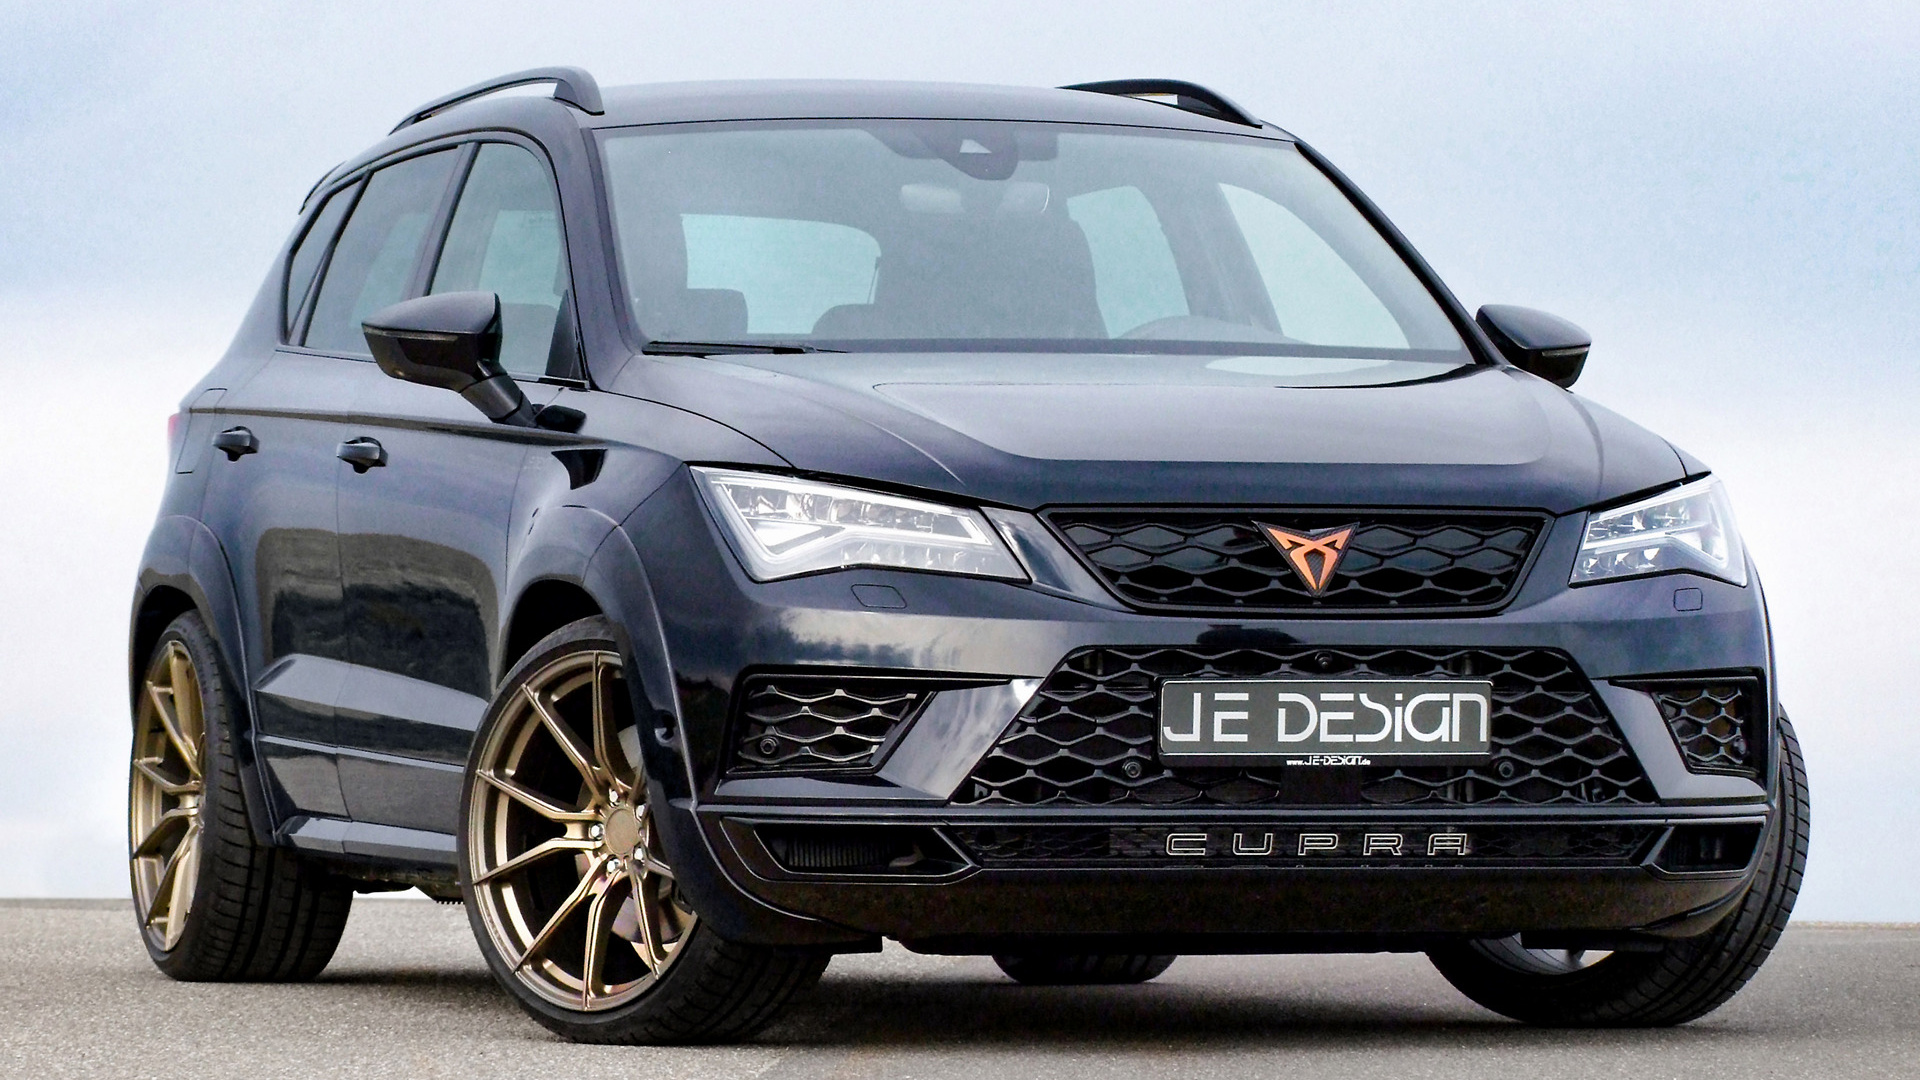 2020 Cupra Ateca Widebody Evolution by Je Design - Wallpapers and